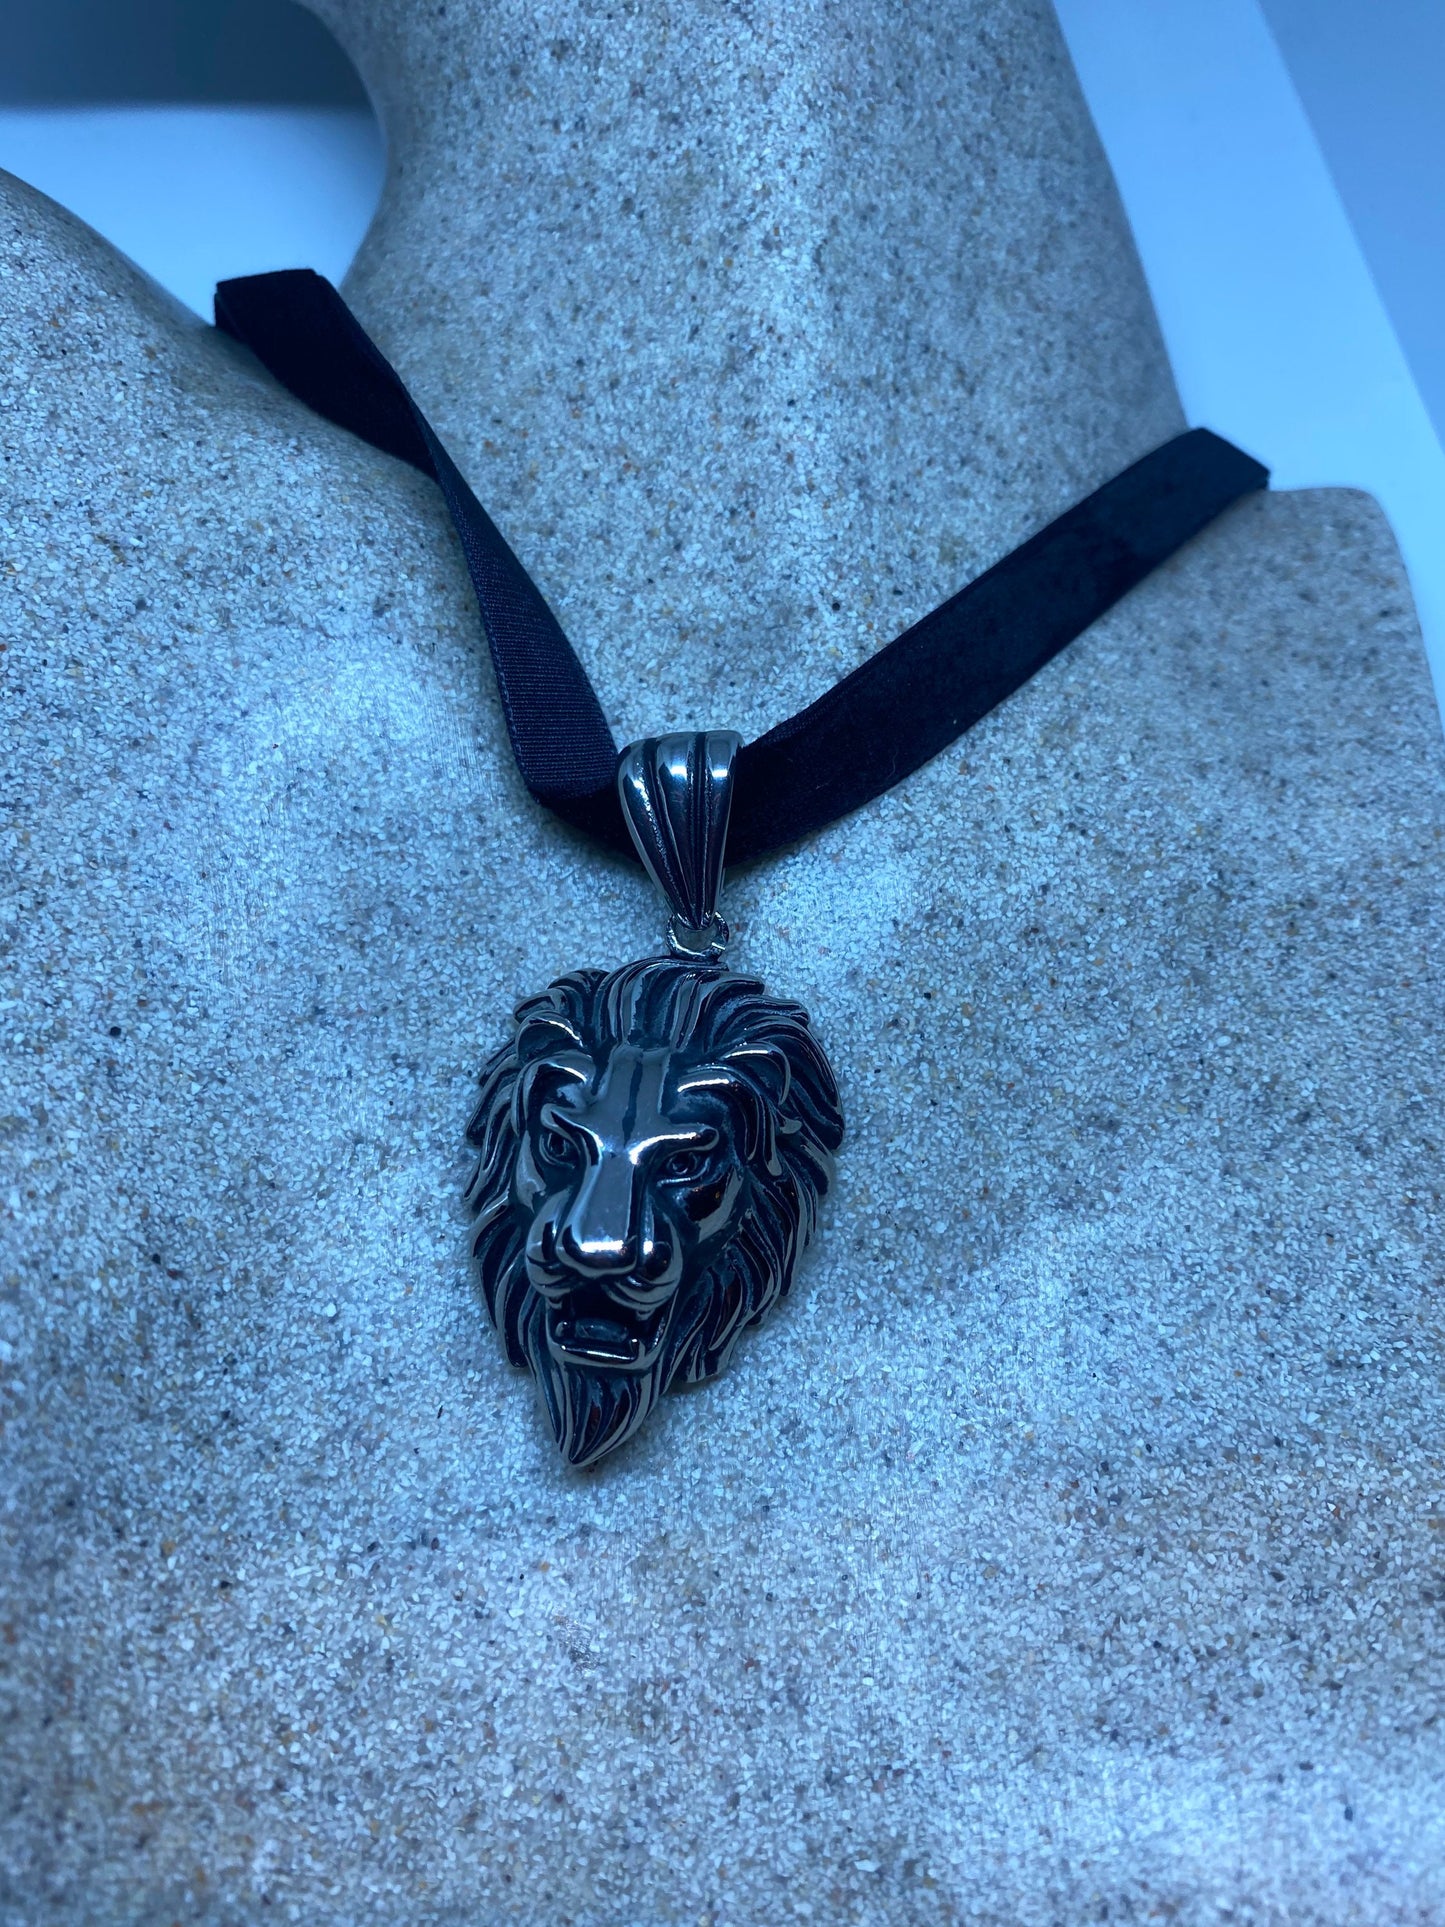 Vintage Handmade Silver Stainless Steel Gothic Lion Pendant Necklace